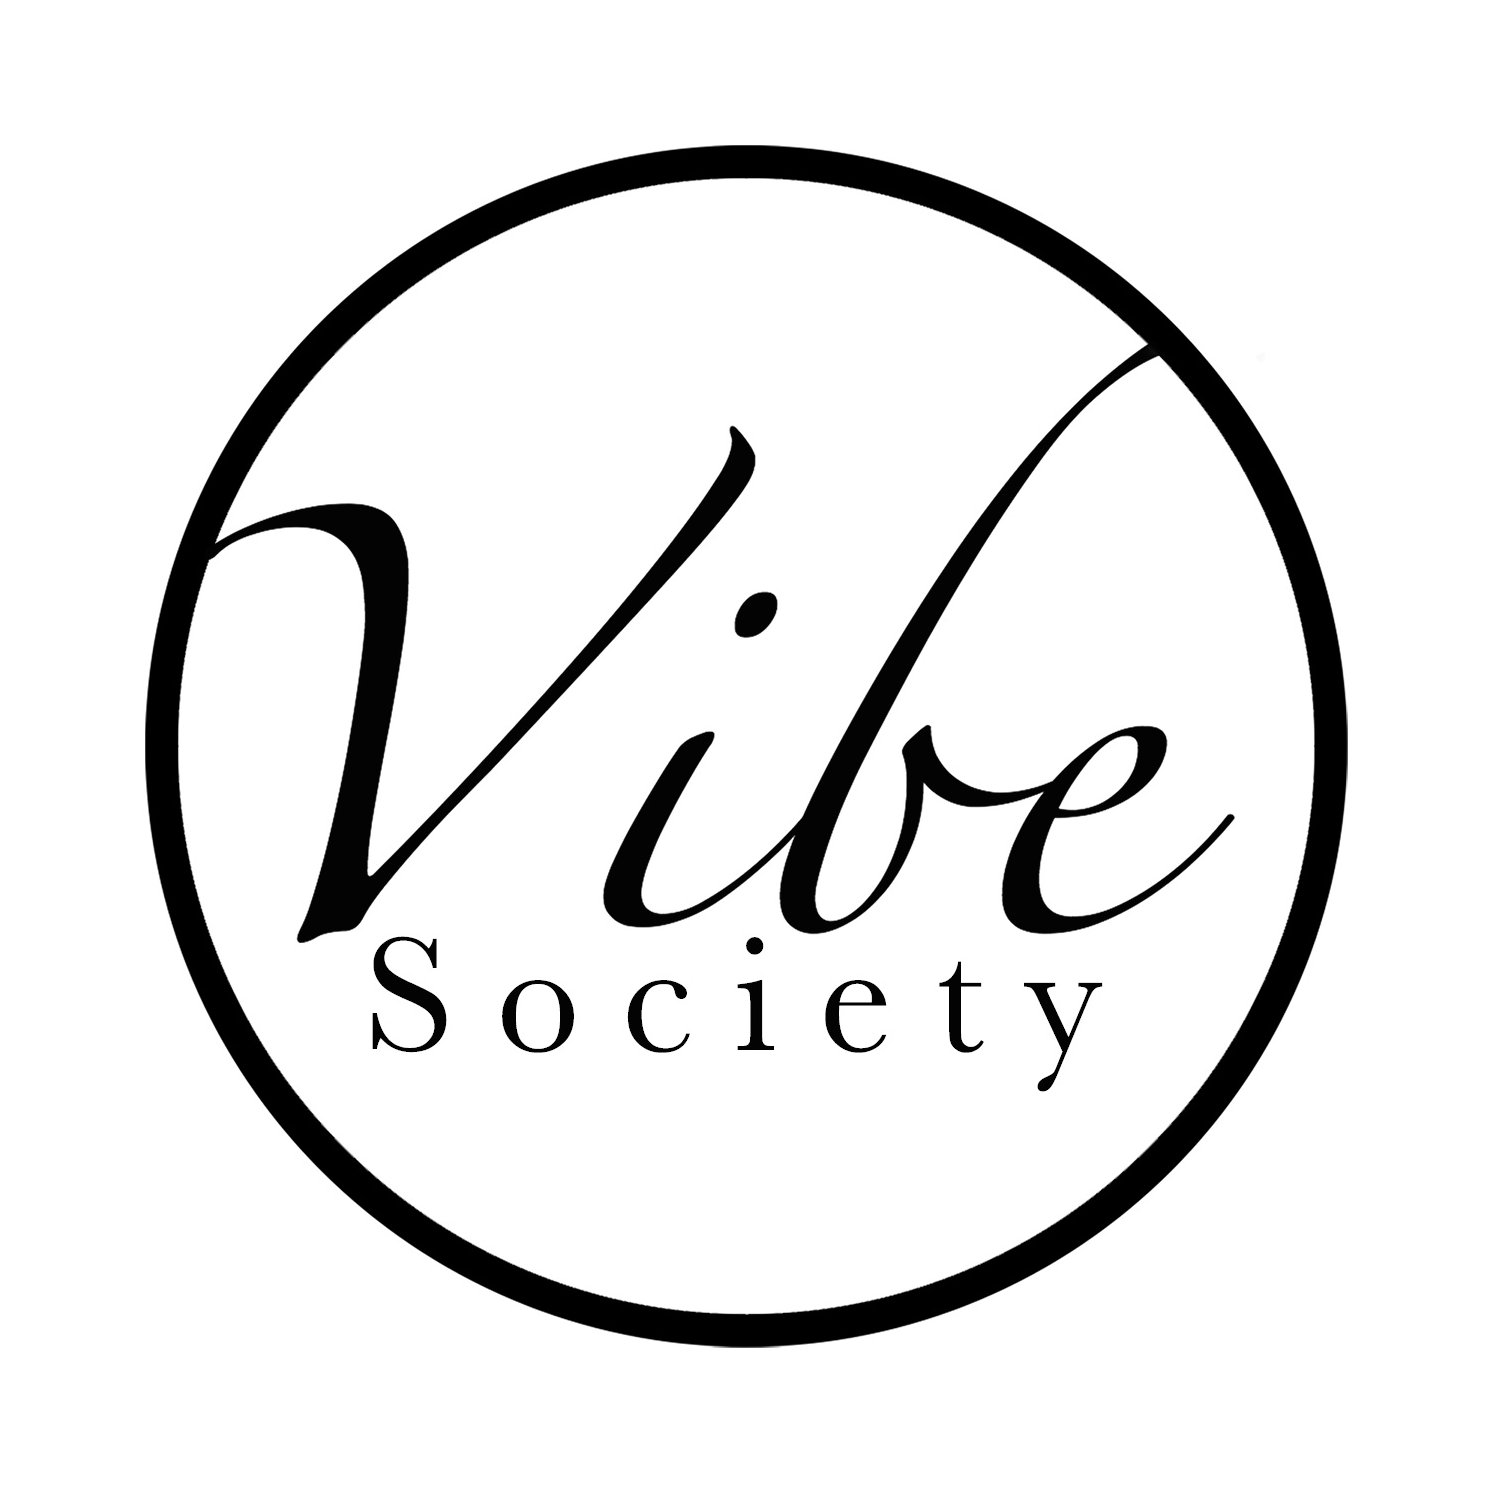 Create Your Own Vibe.
More info, website, and product line coming soon!